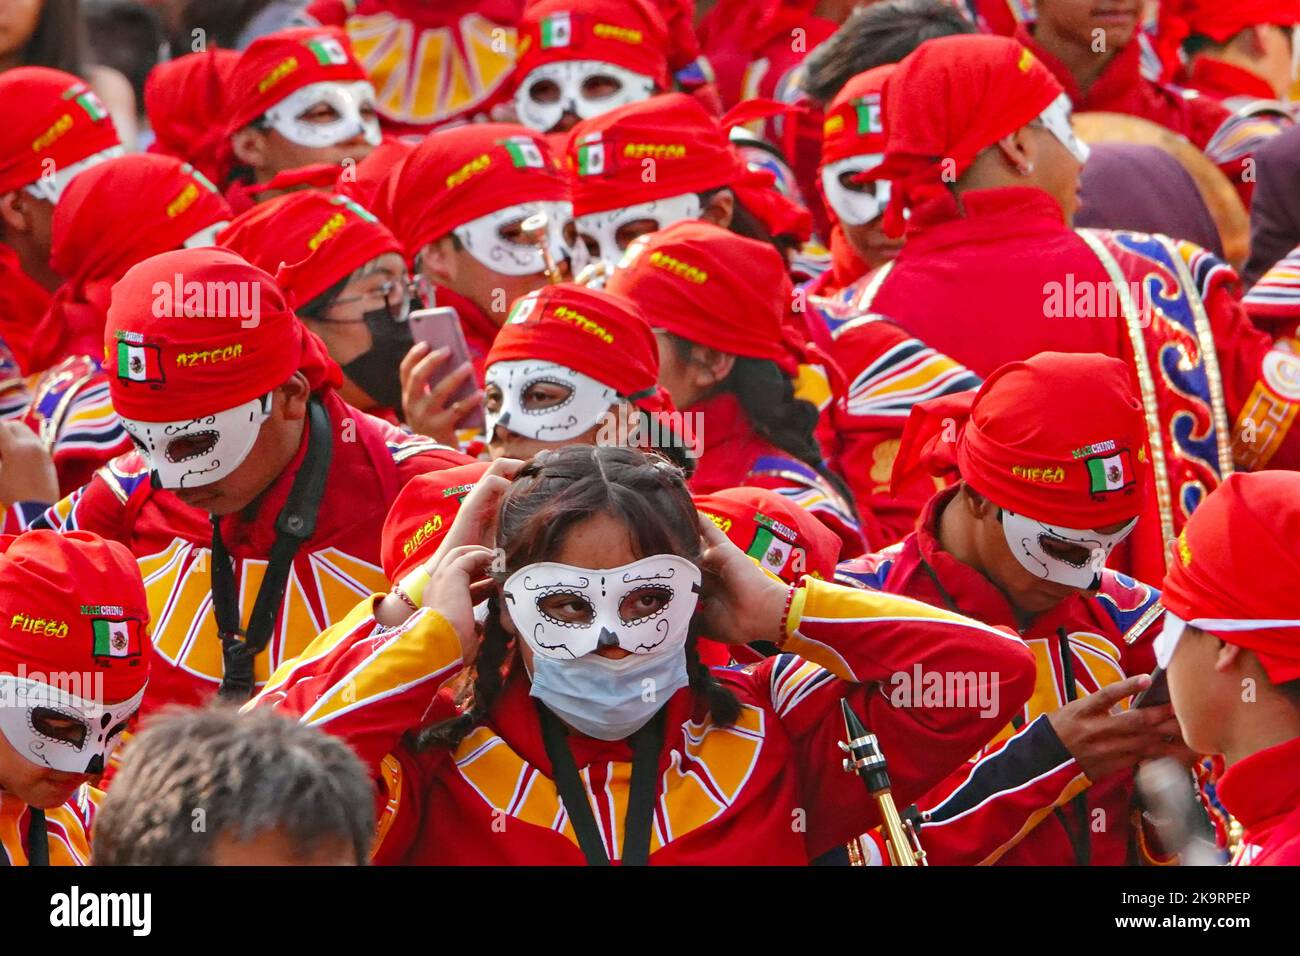 Mexico City, Mexico. 29th Oct, 2022. A marching band adjusts their costumes before marching in the Grand Parade of the Dead to celebrate Dia de los Muertos holiday on Paseo de la Reforma, October 29, 2022 in Mexico City, Mexico. Credit: Richard Ellis/Richard Ellis/Alamy Live News Stock Photo